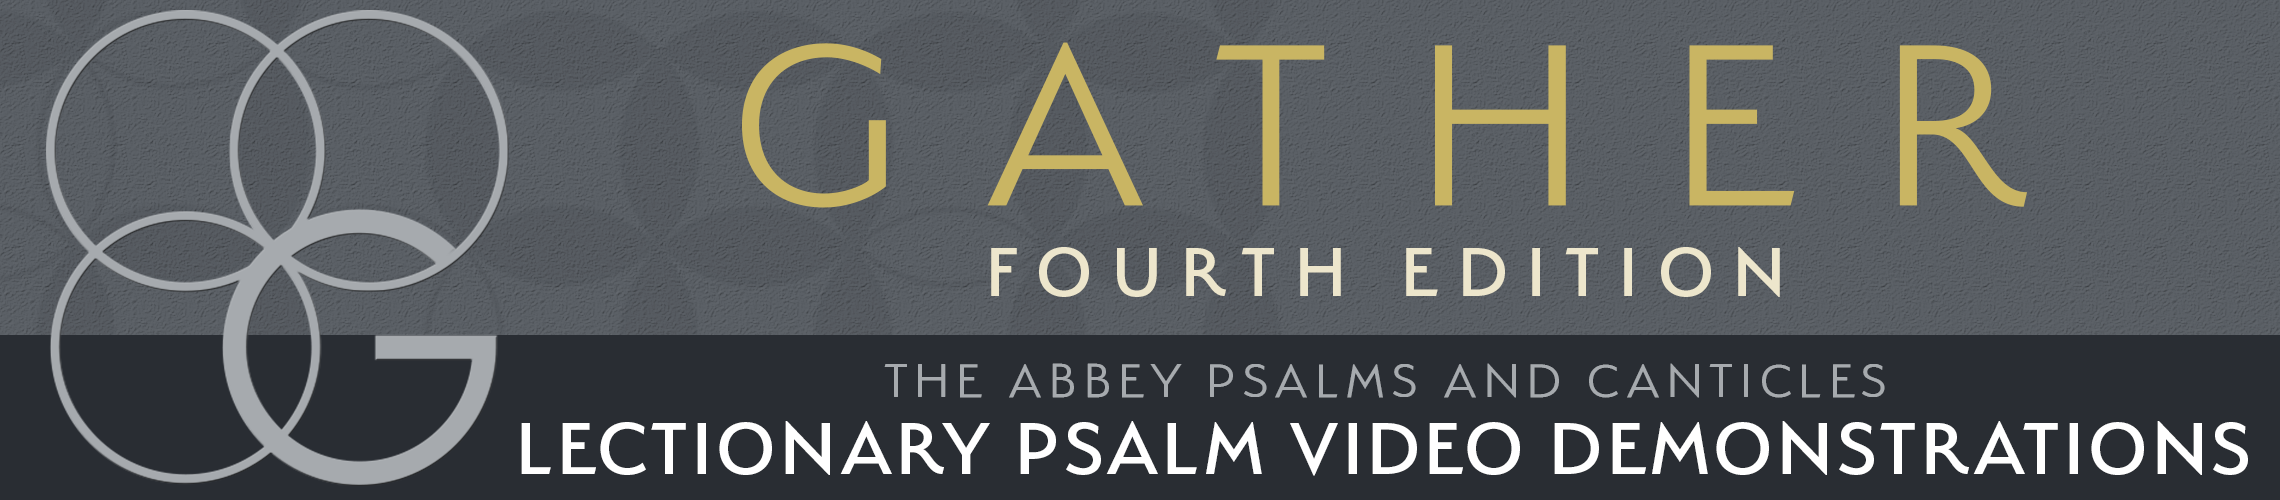 Gather 4 Lectionary Videos